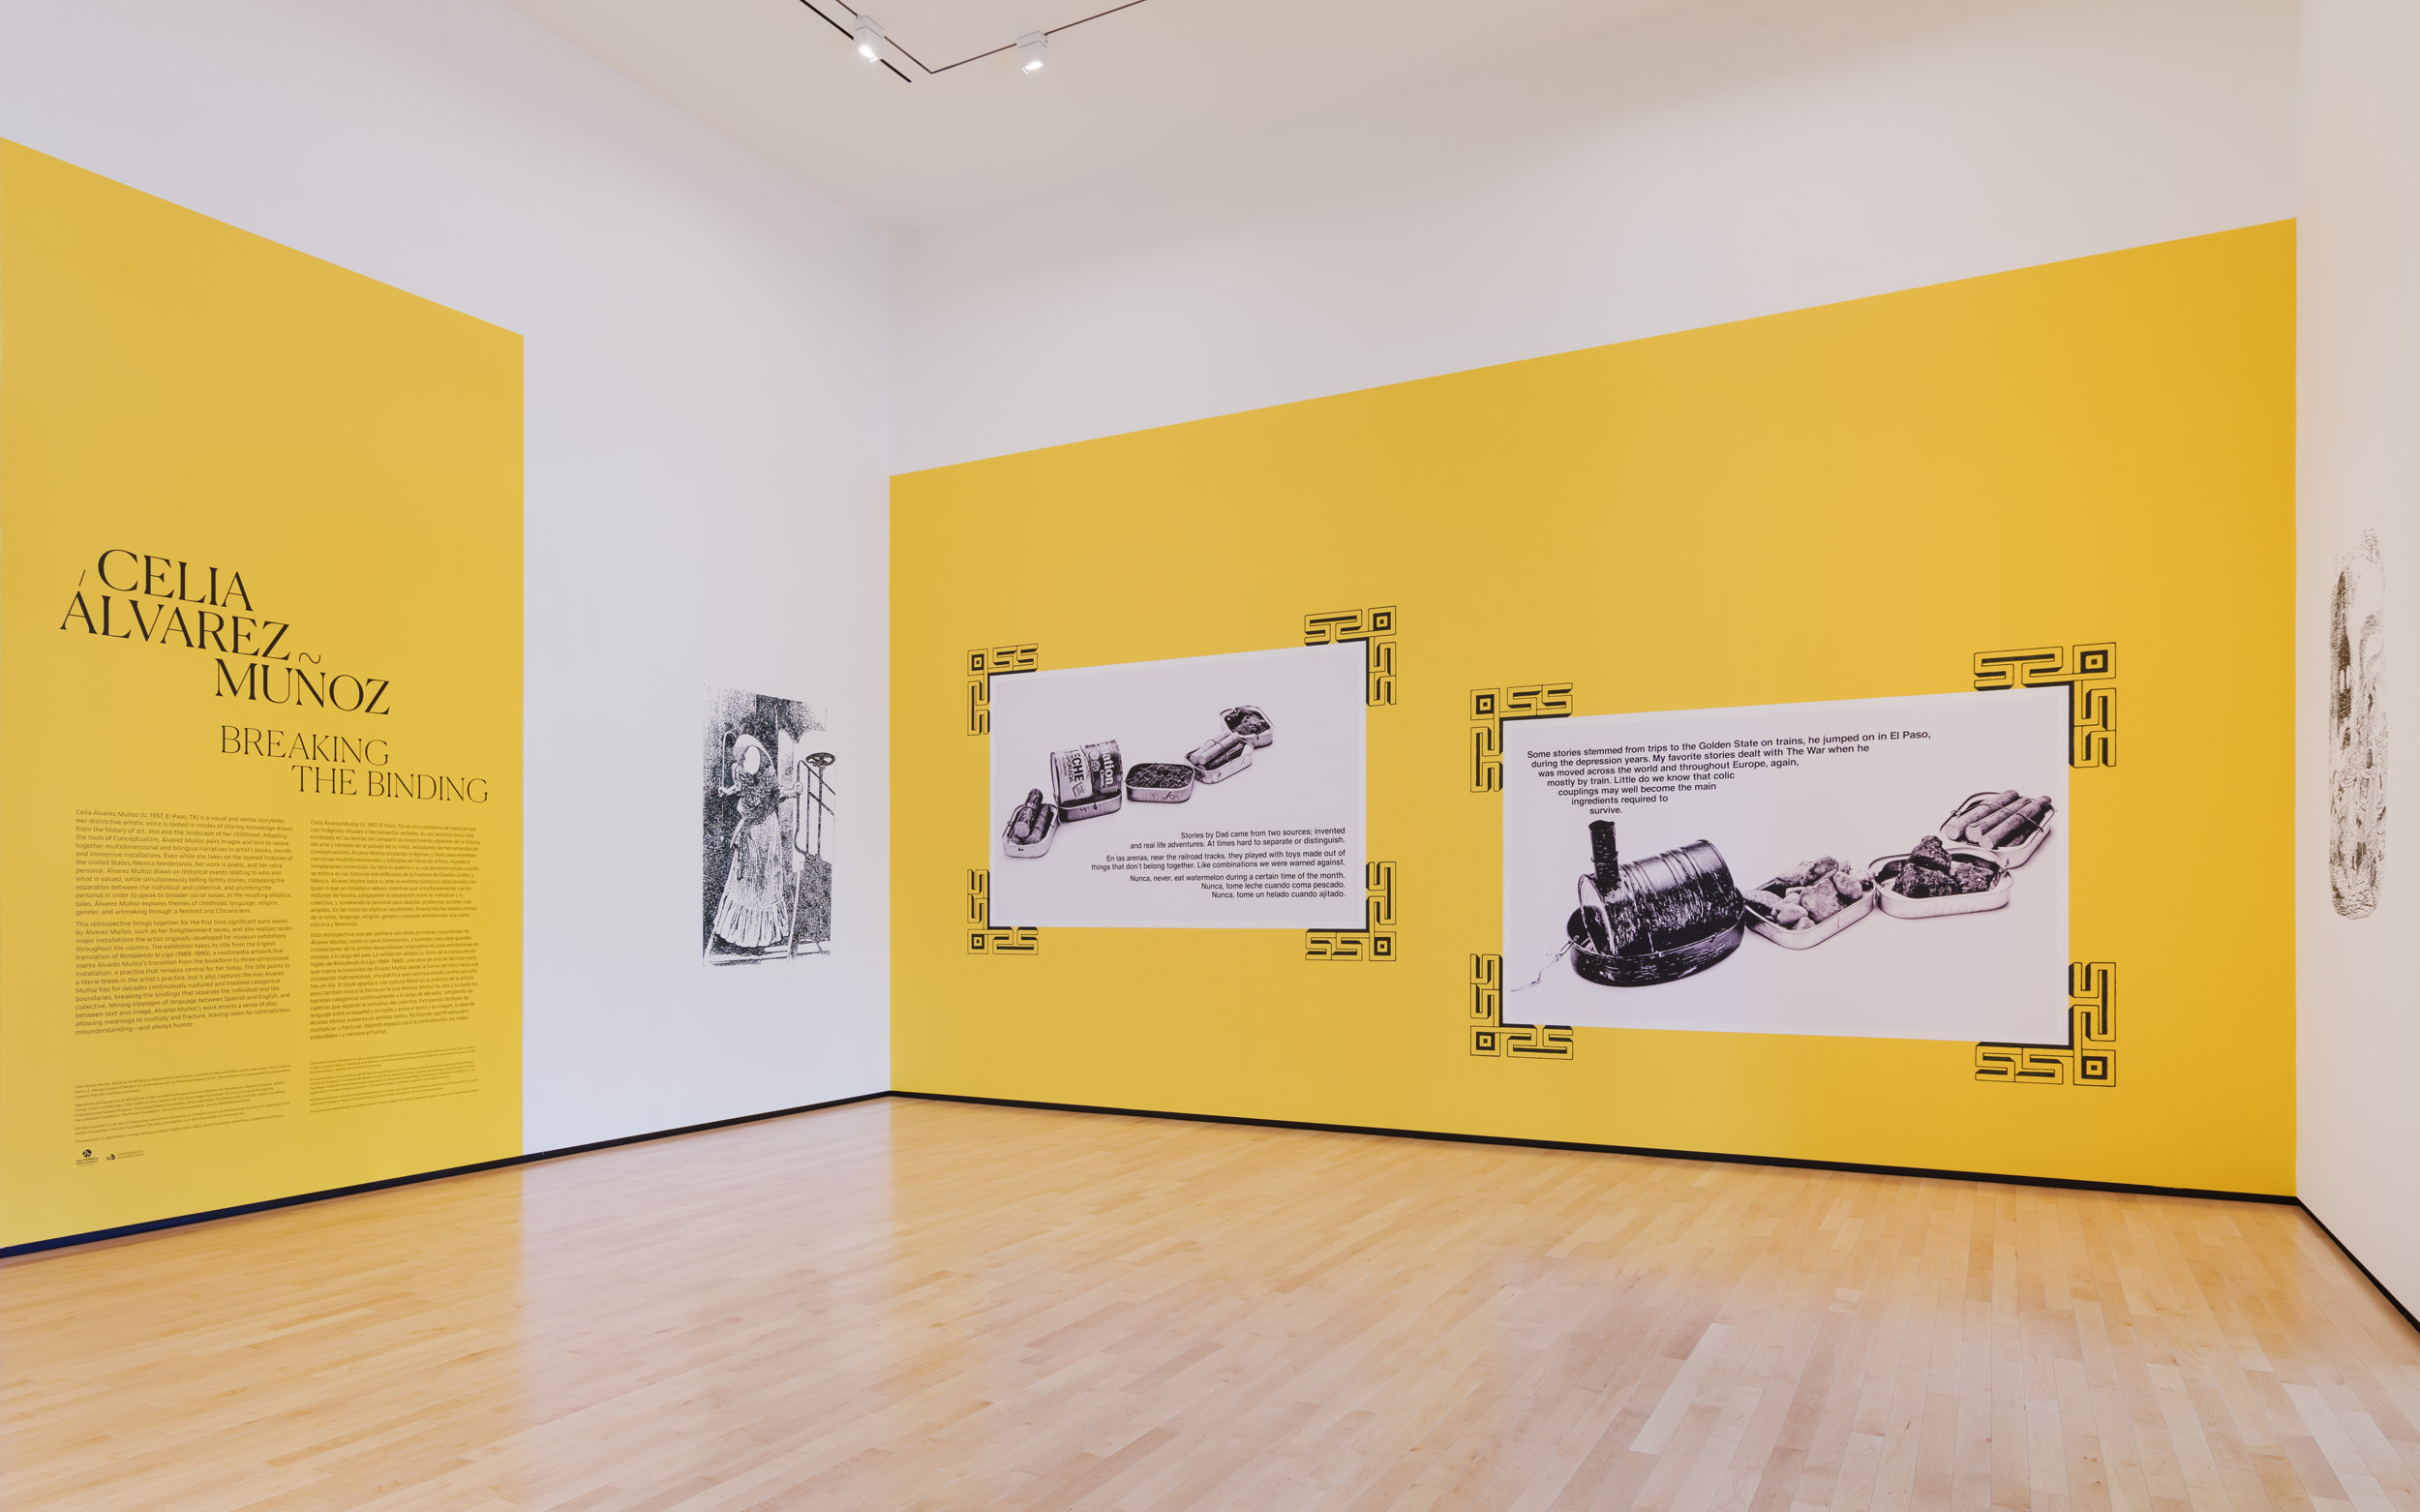 Museum interior showing the corner where two bright yellow walls meet; on the left is a text panel titled "Celia Alvarez Munoz / Breaking the Binding"; on the right are two large black-and-white drawings with accompanying texts, with geometric patterns outlining their corners.